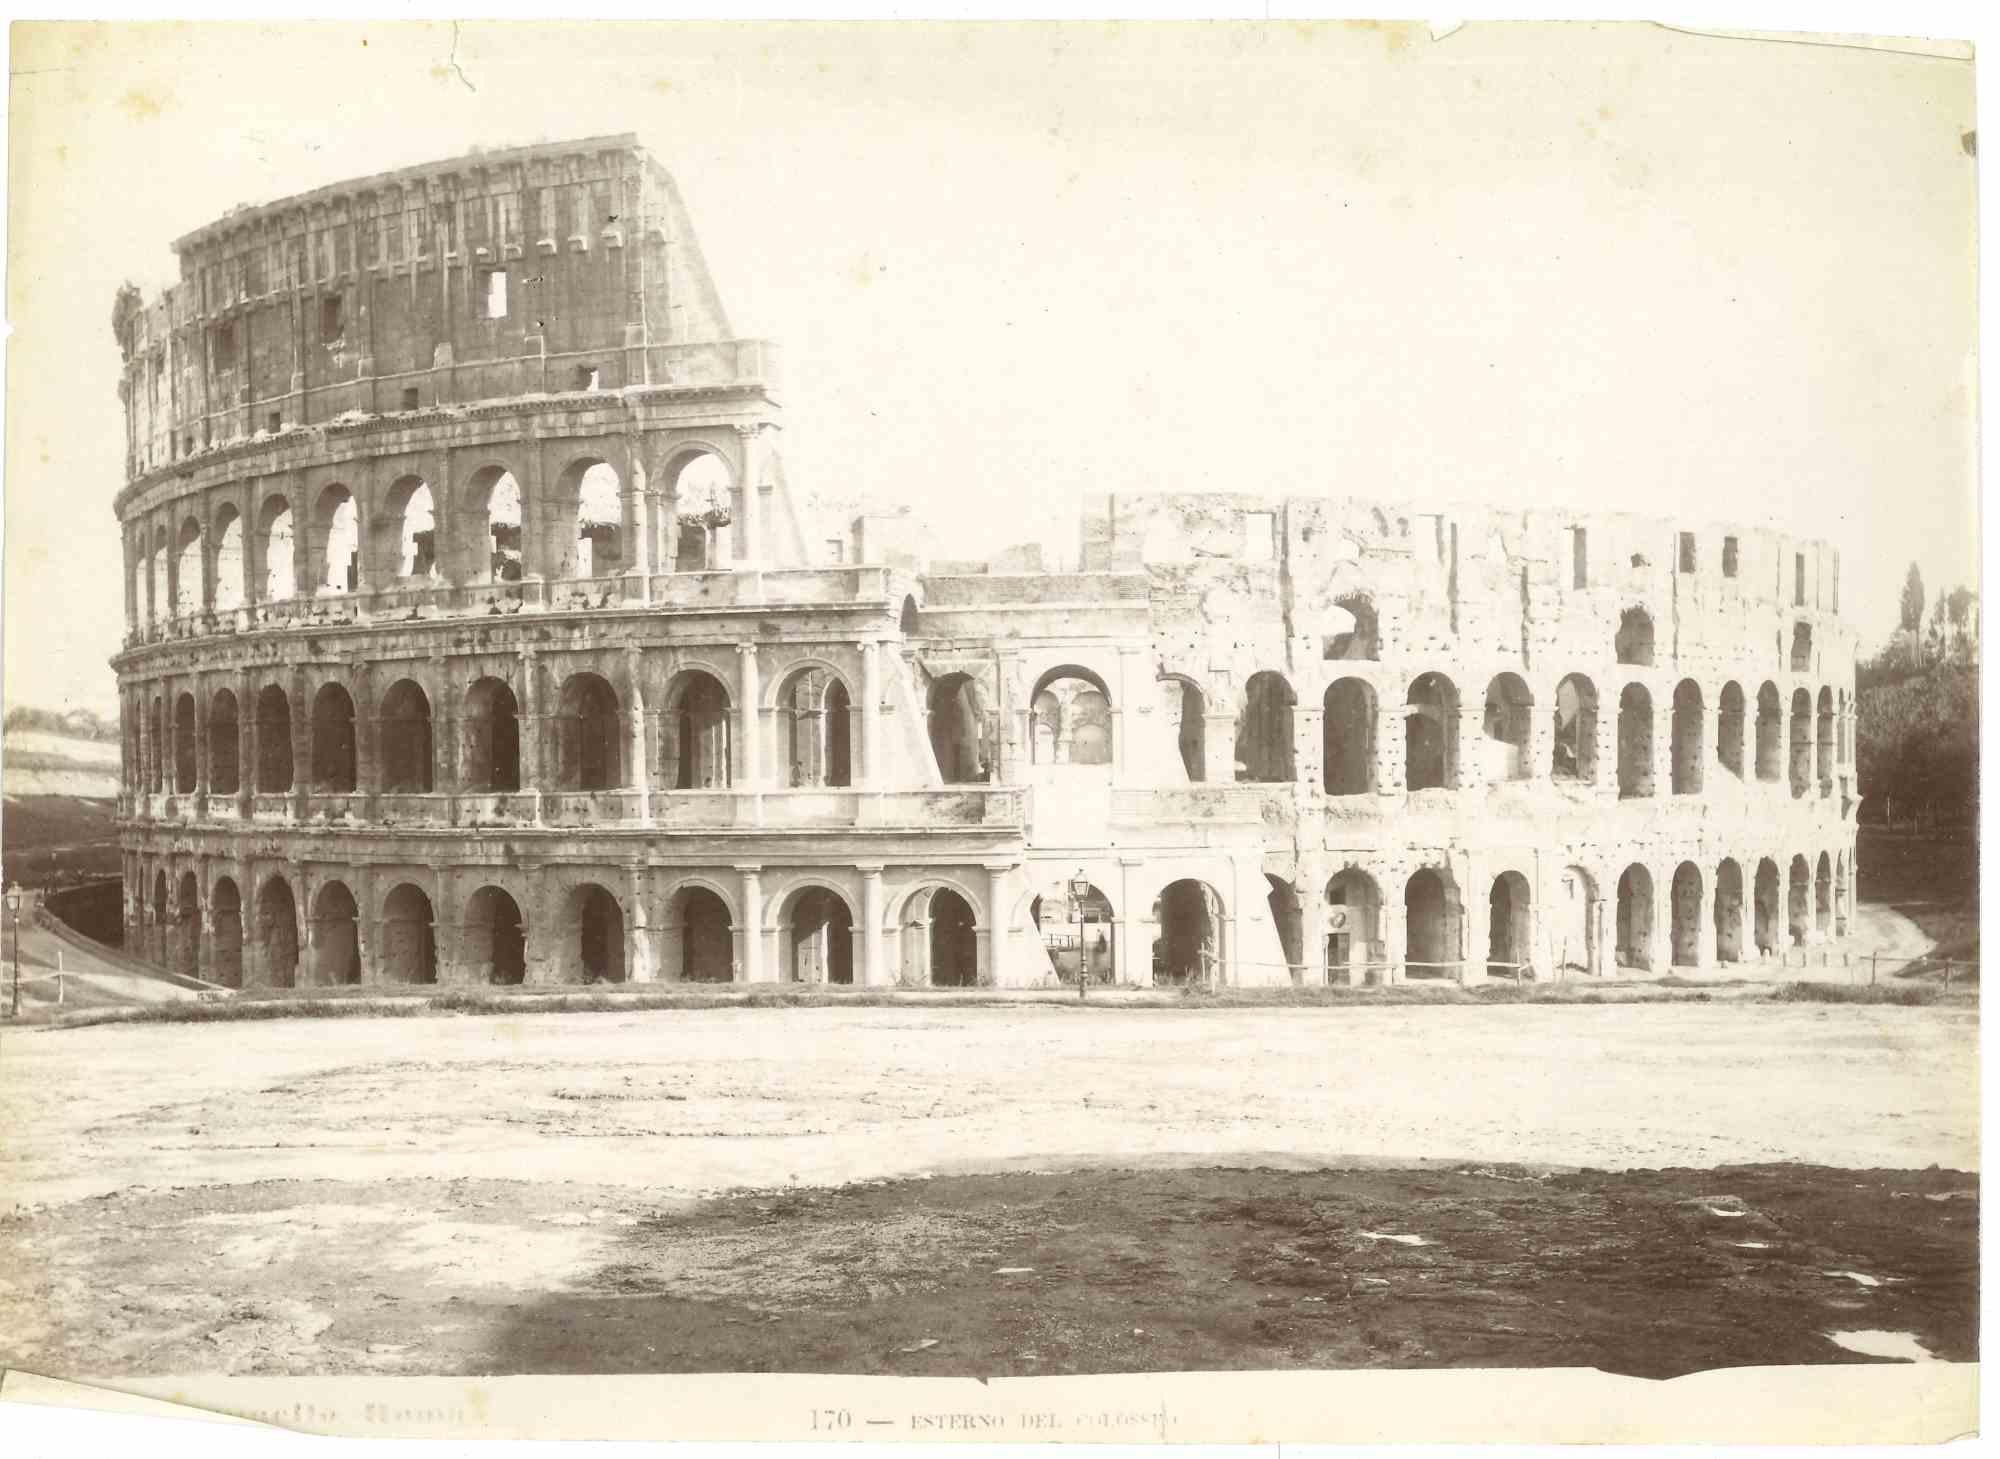 Colosseum View is a vintage print in salt silver realized by Ludovico Tuminello in the early 20th Century.

Good conditions except for some foxing and folding.